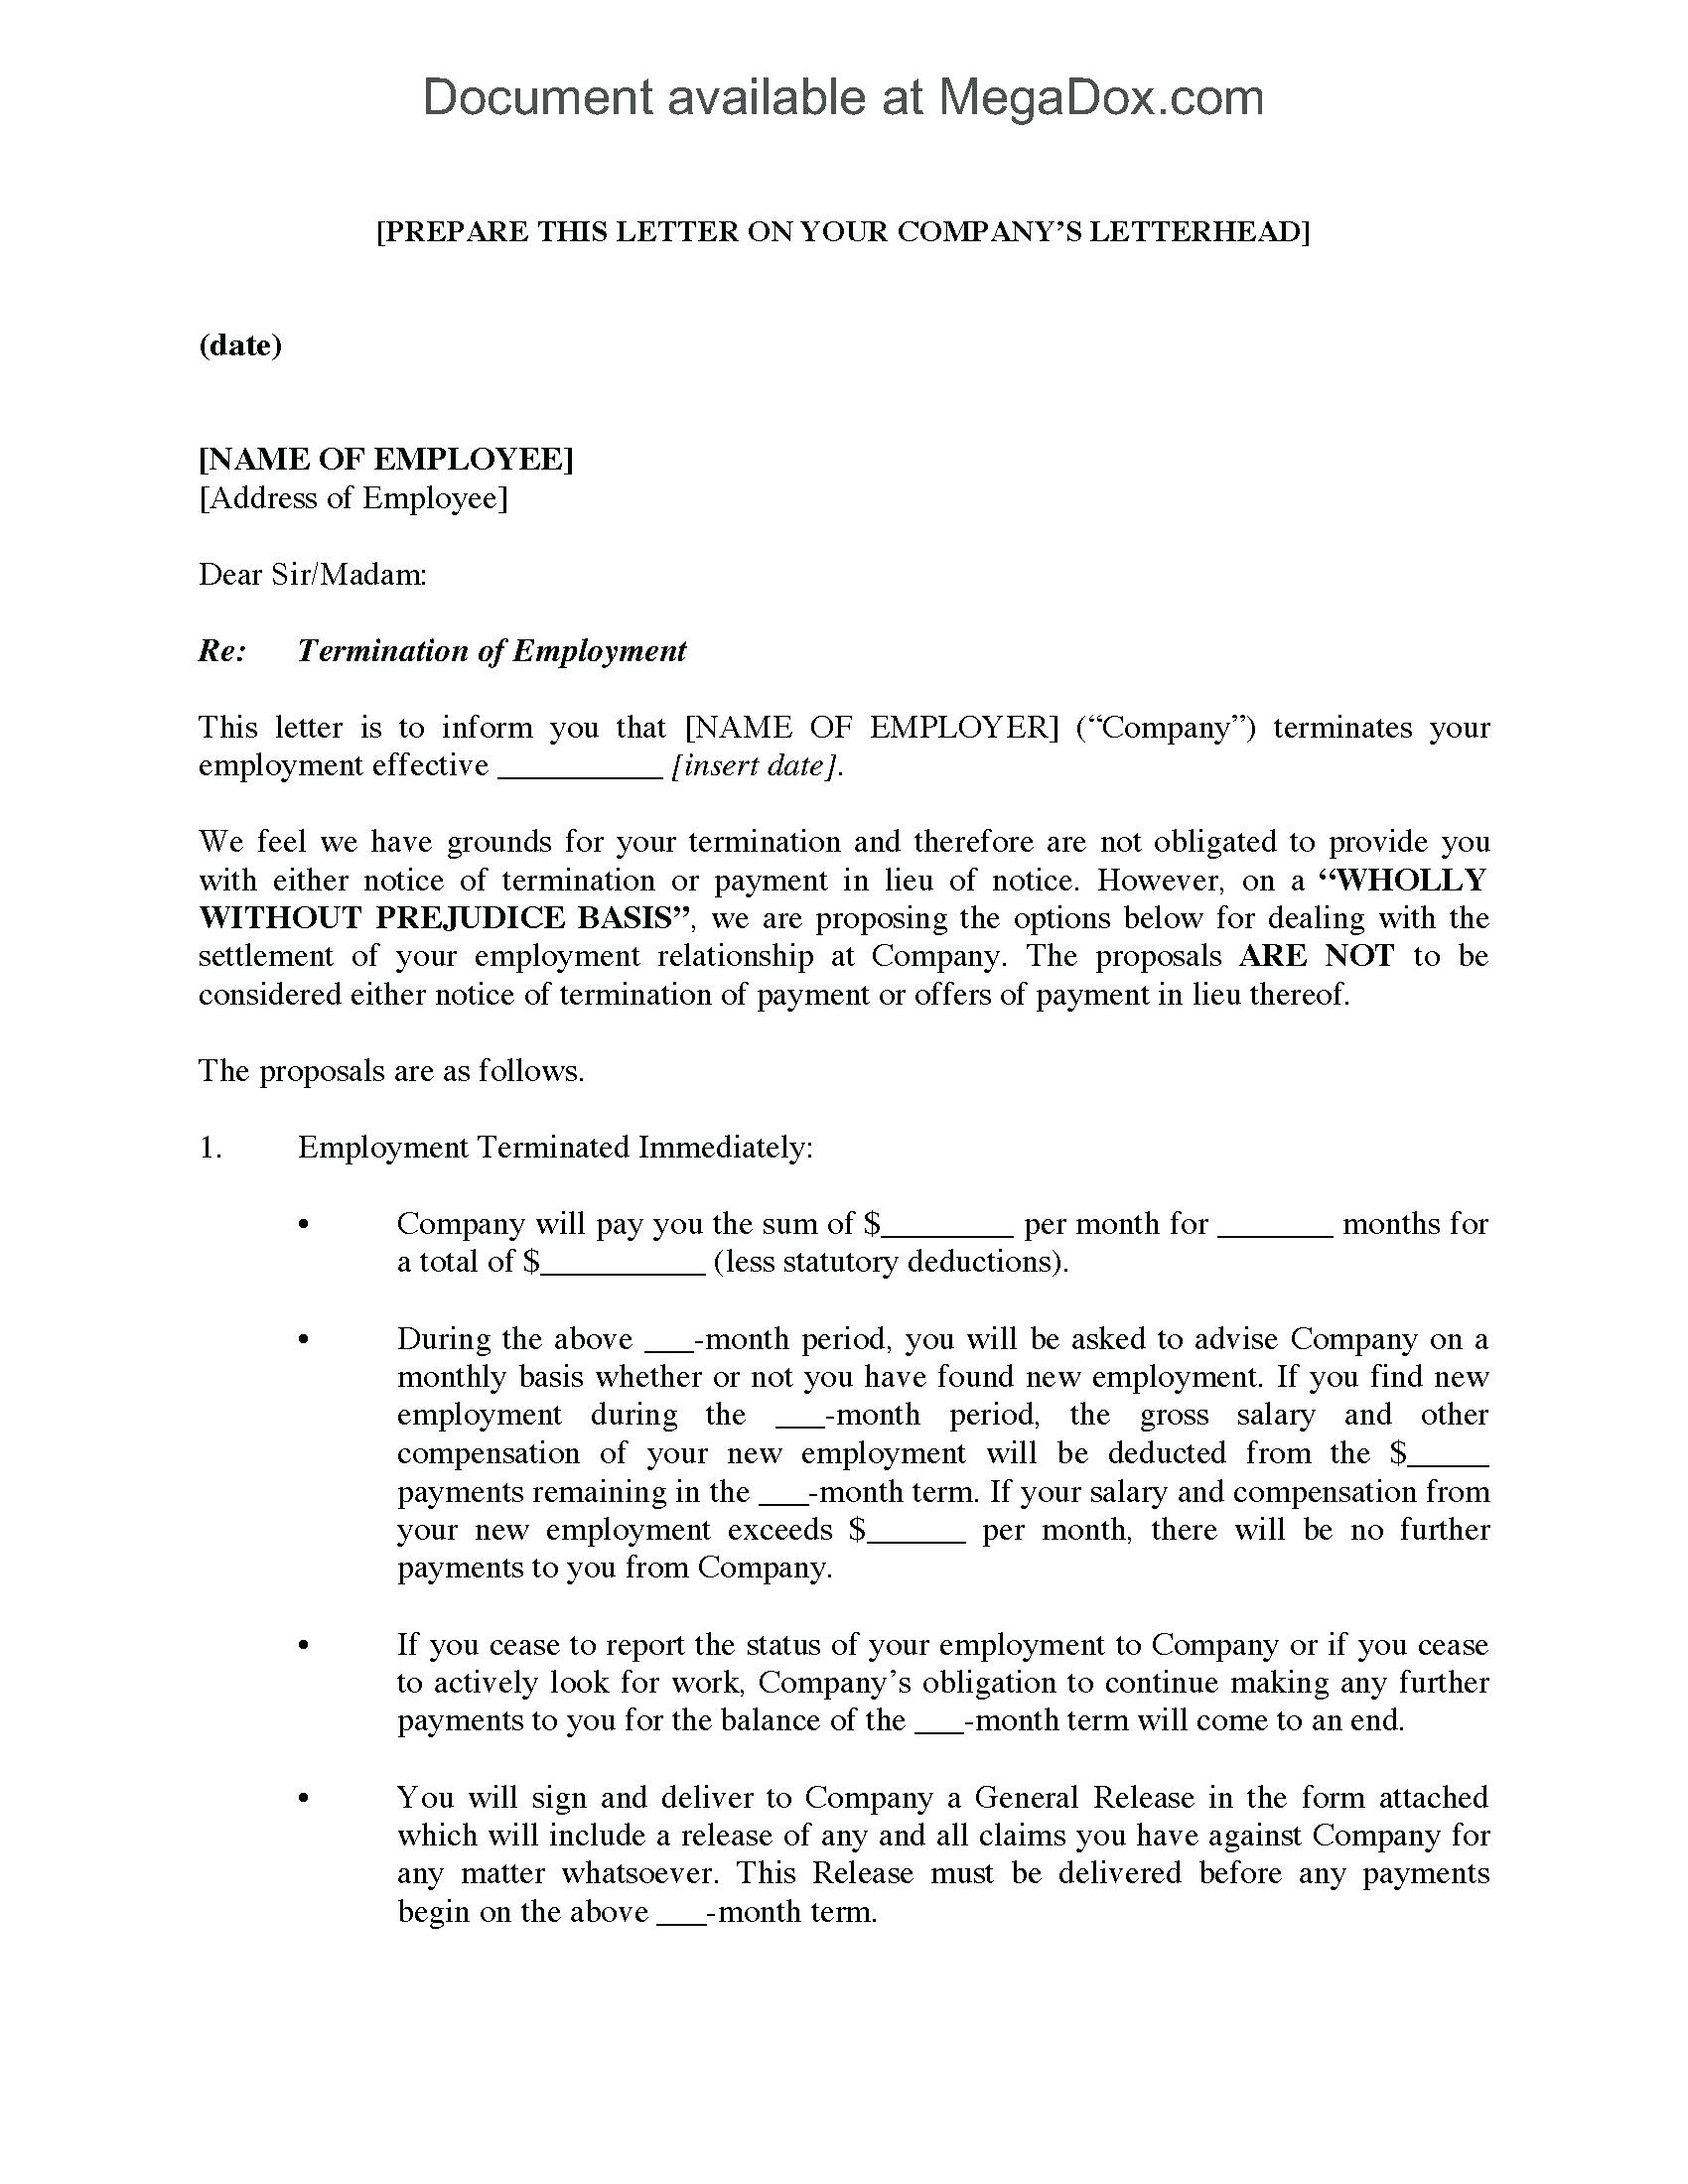 notice of default letter to tenant